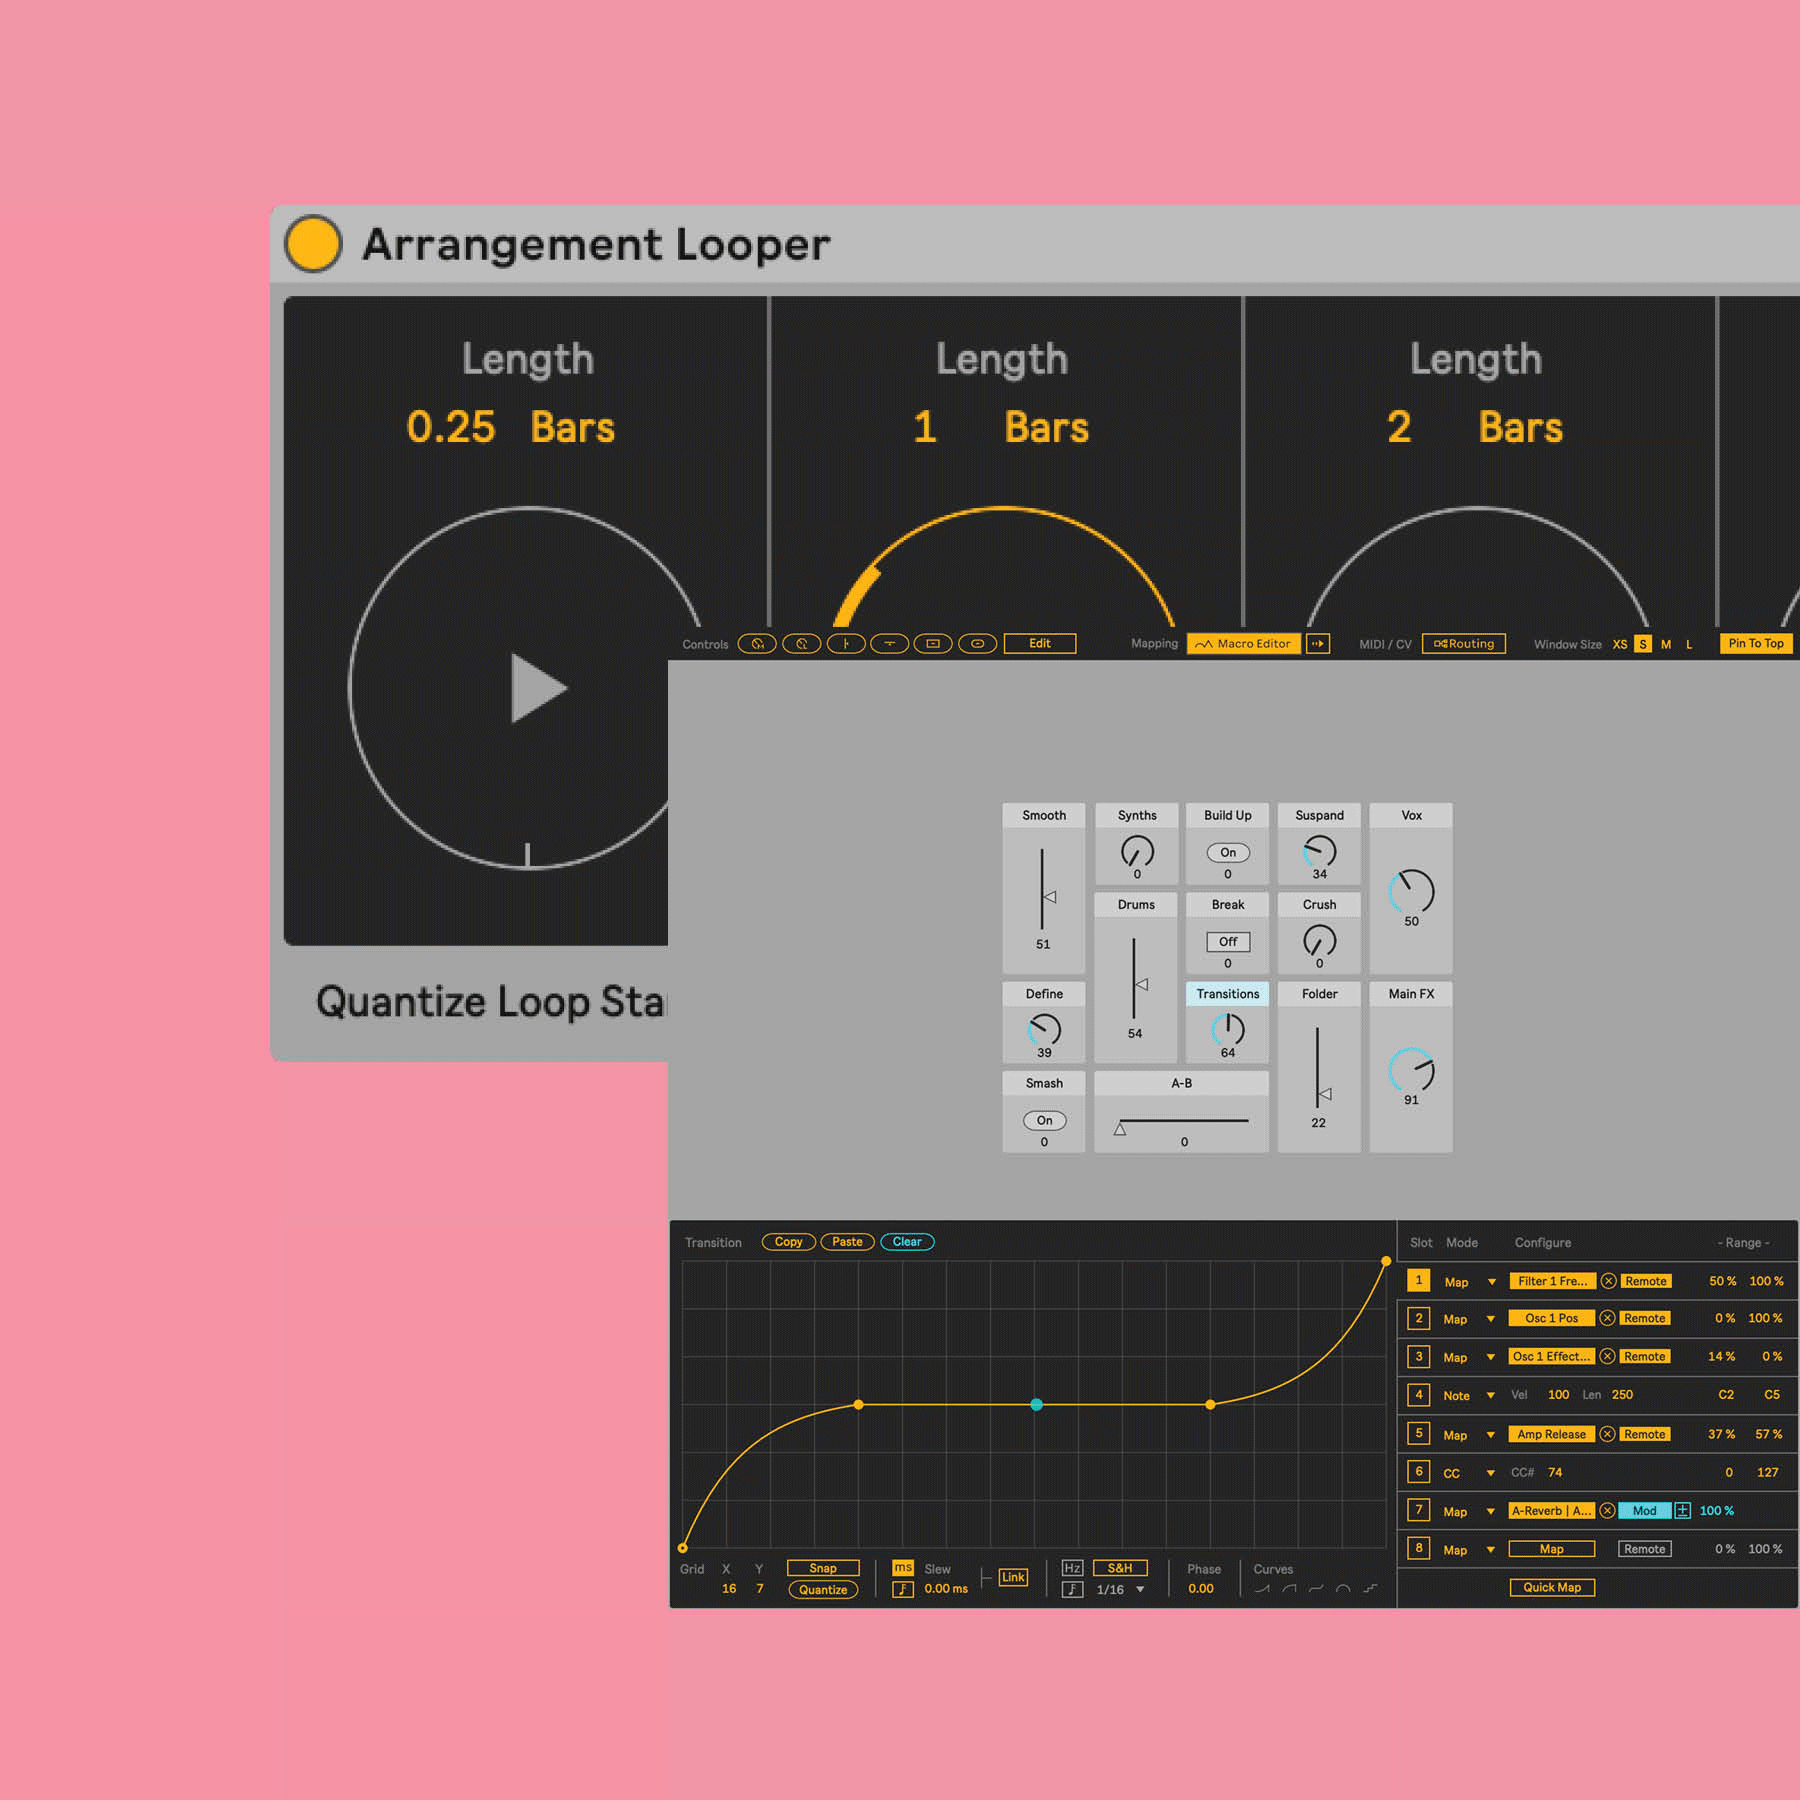 What's new in Live 12 | Ableton